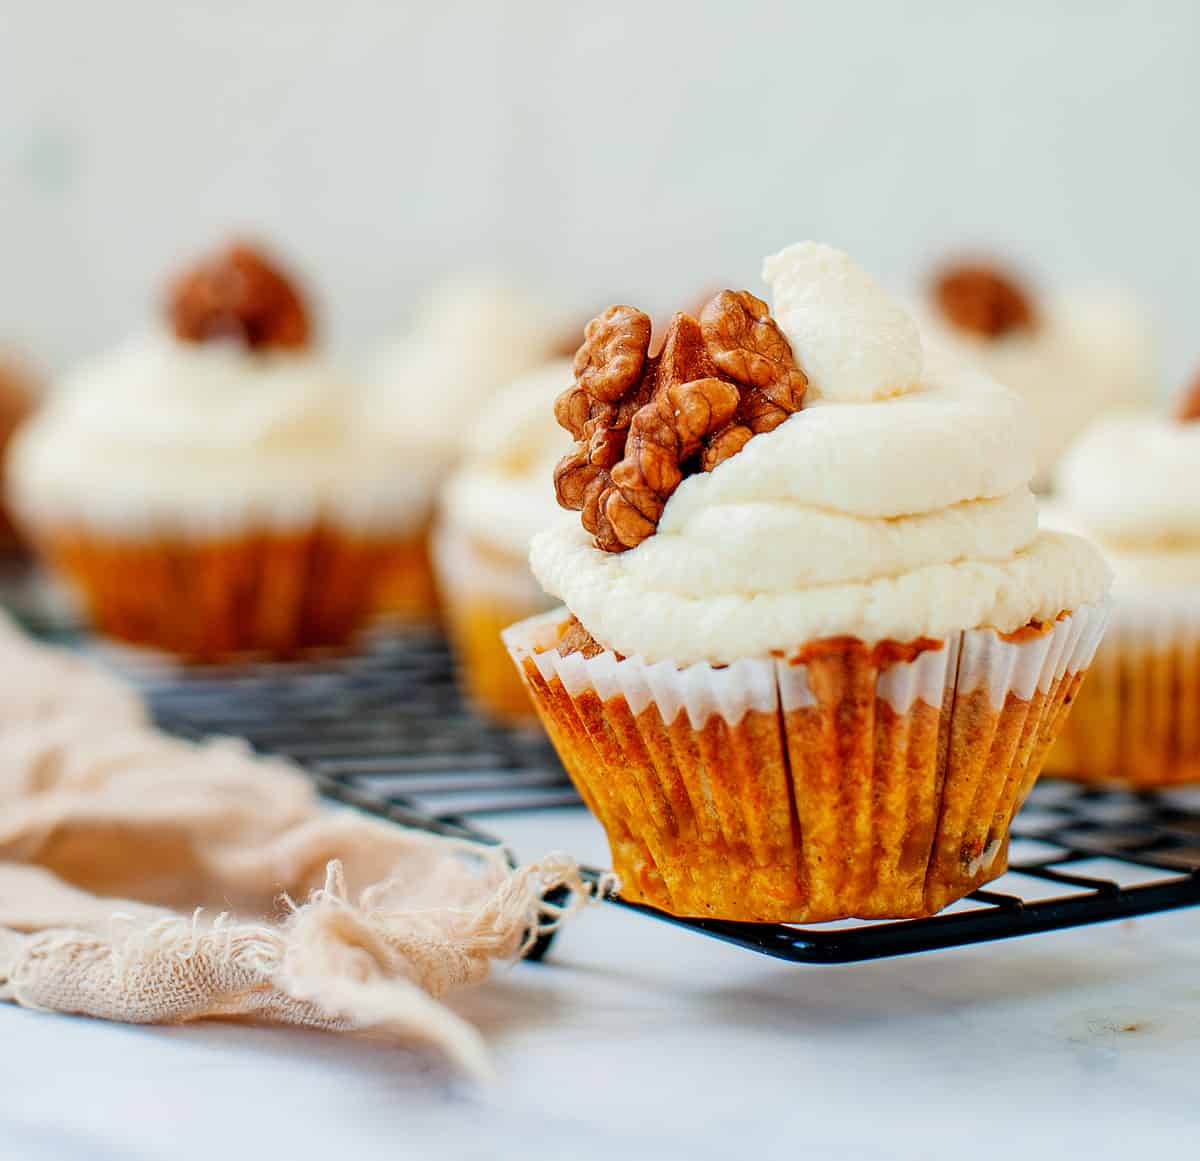 A carrot cake cupcake with cream cheese frosting topped with a walnut.